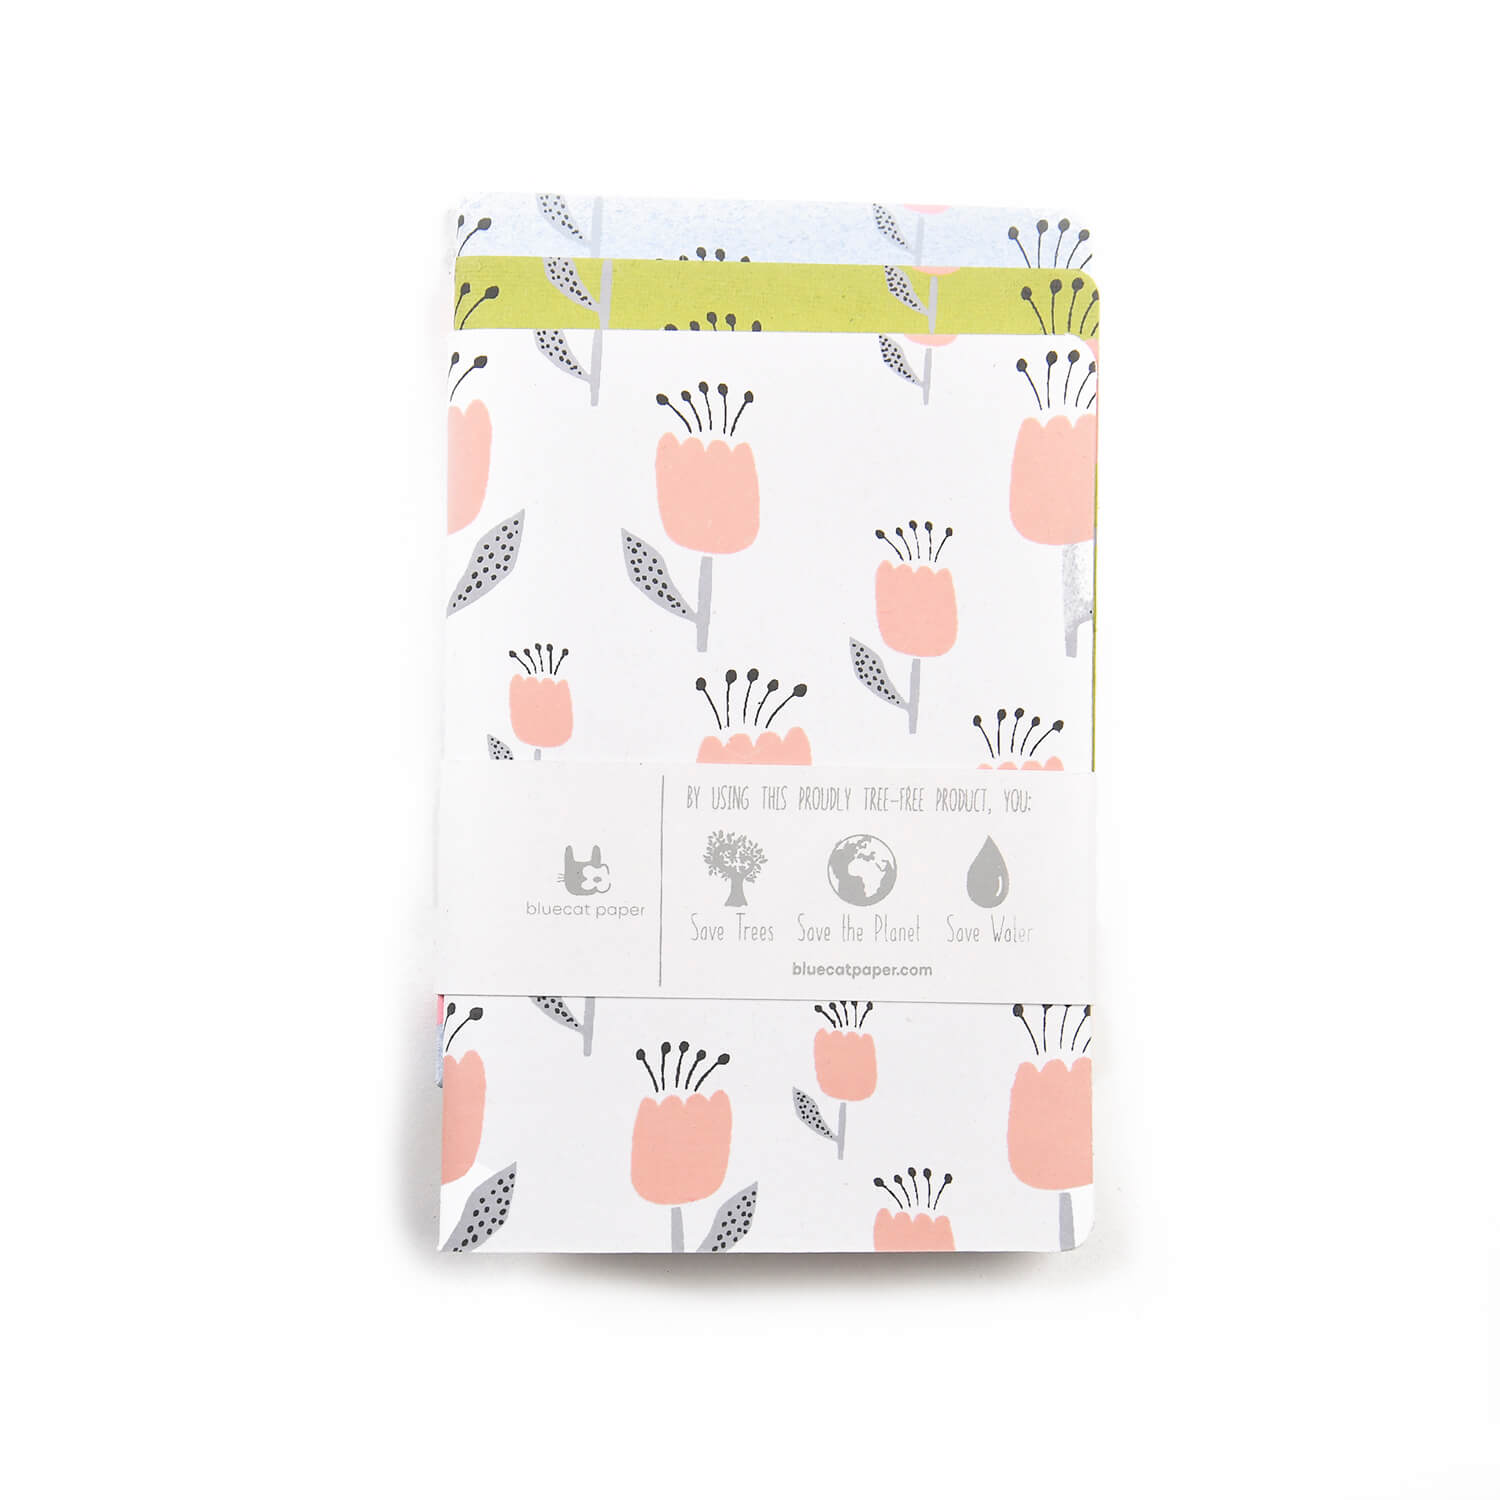 Handprinted Stationery – A6 Floral Notebooks (Pack of 3) Handmade Notebooks with Plain, Dots and Grid pages